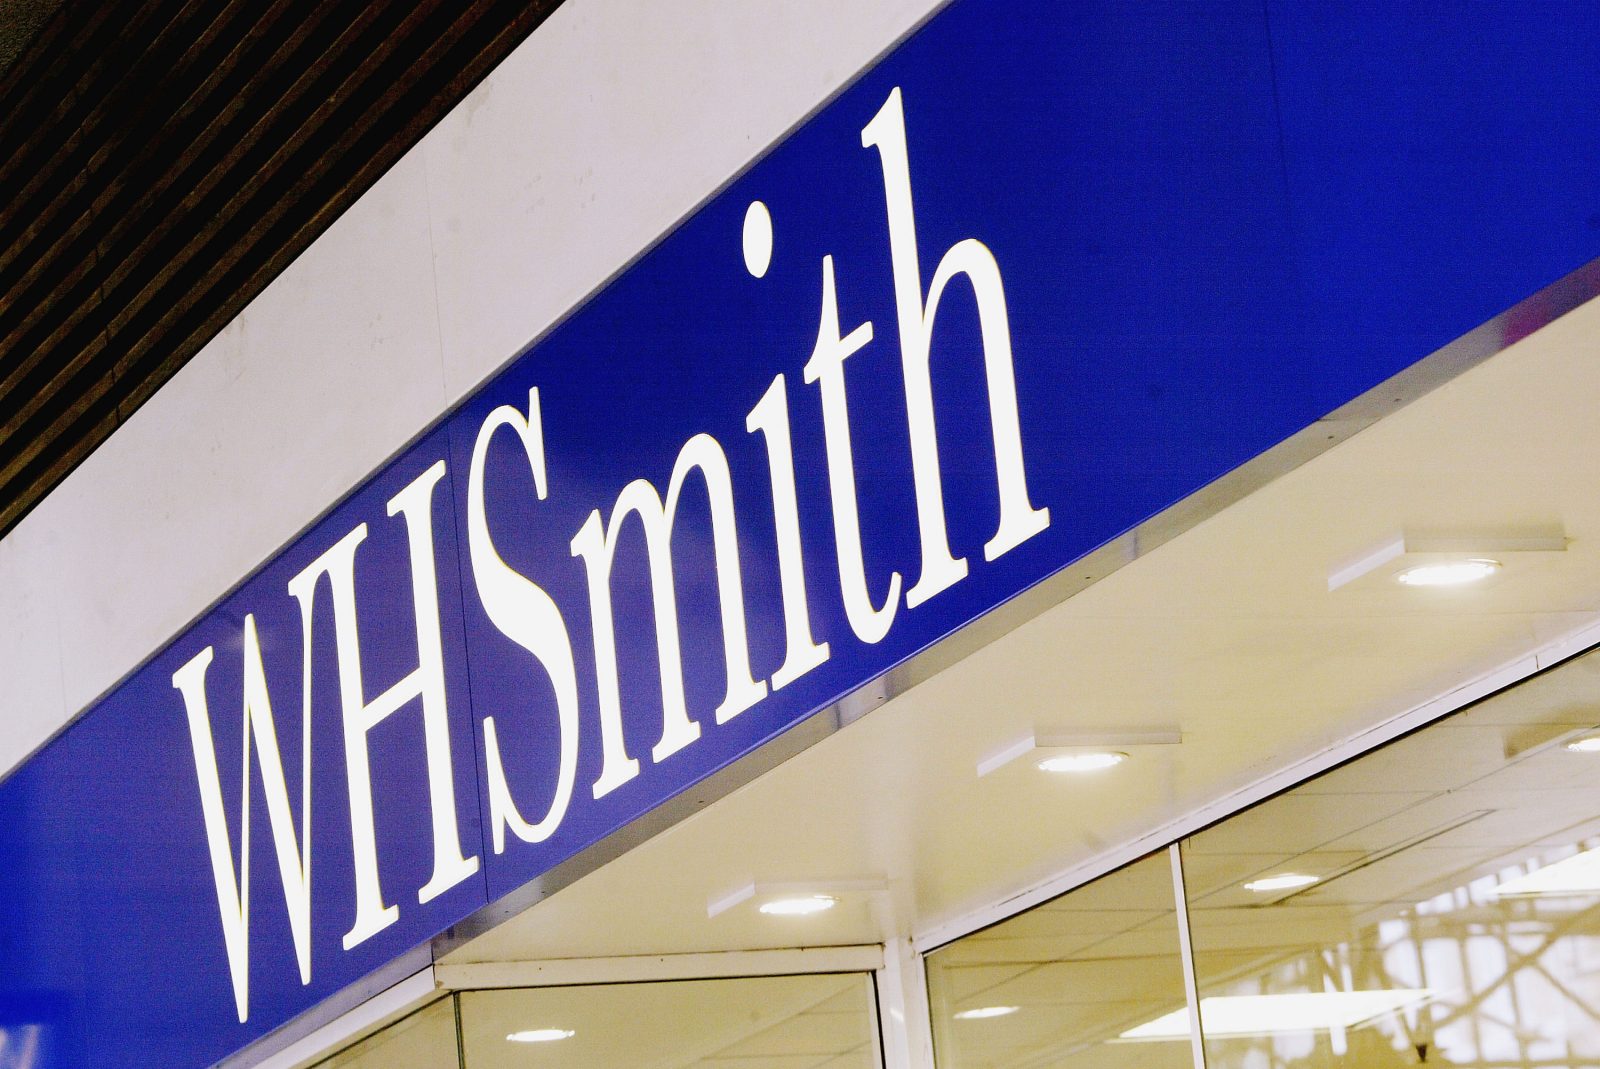 WH Smith derisks pensions scheme via Standard Life insurance policy